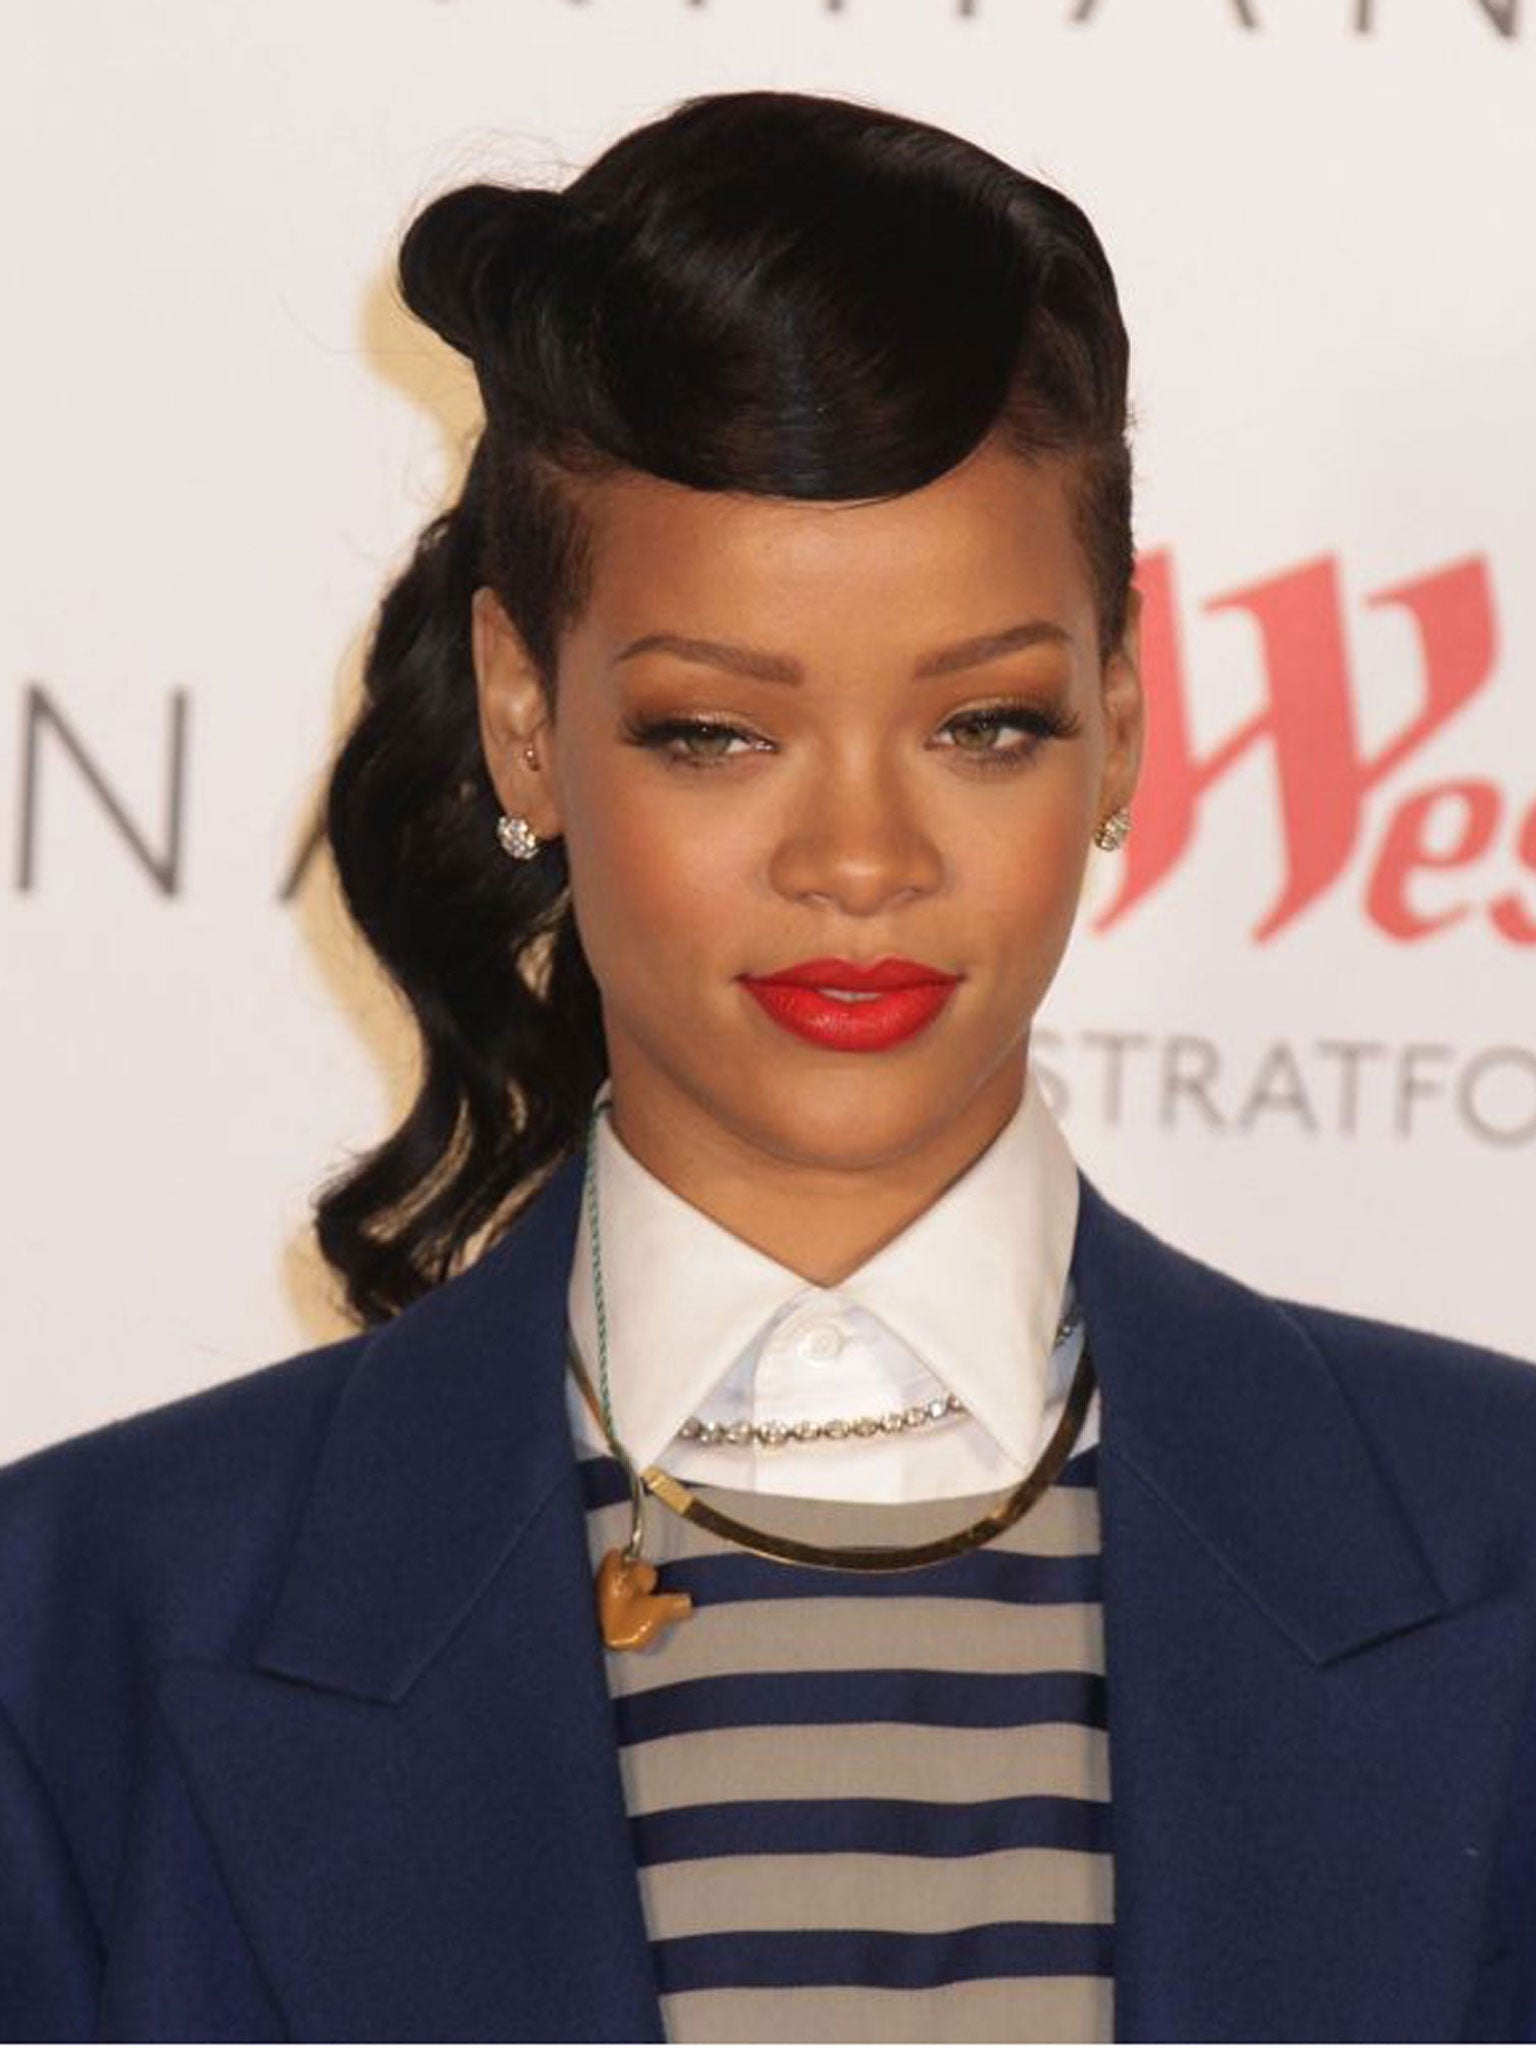 Rhianna has begun legal action against clothing giant Topshop over her image being use don T-shirts